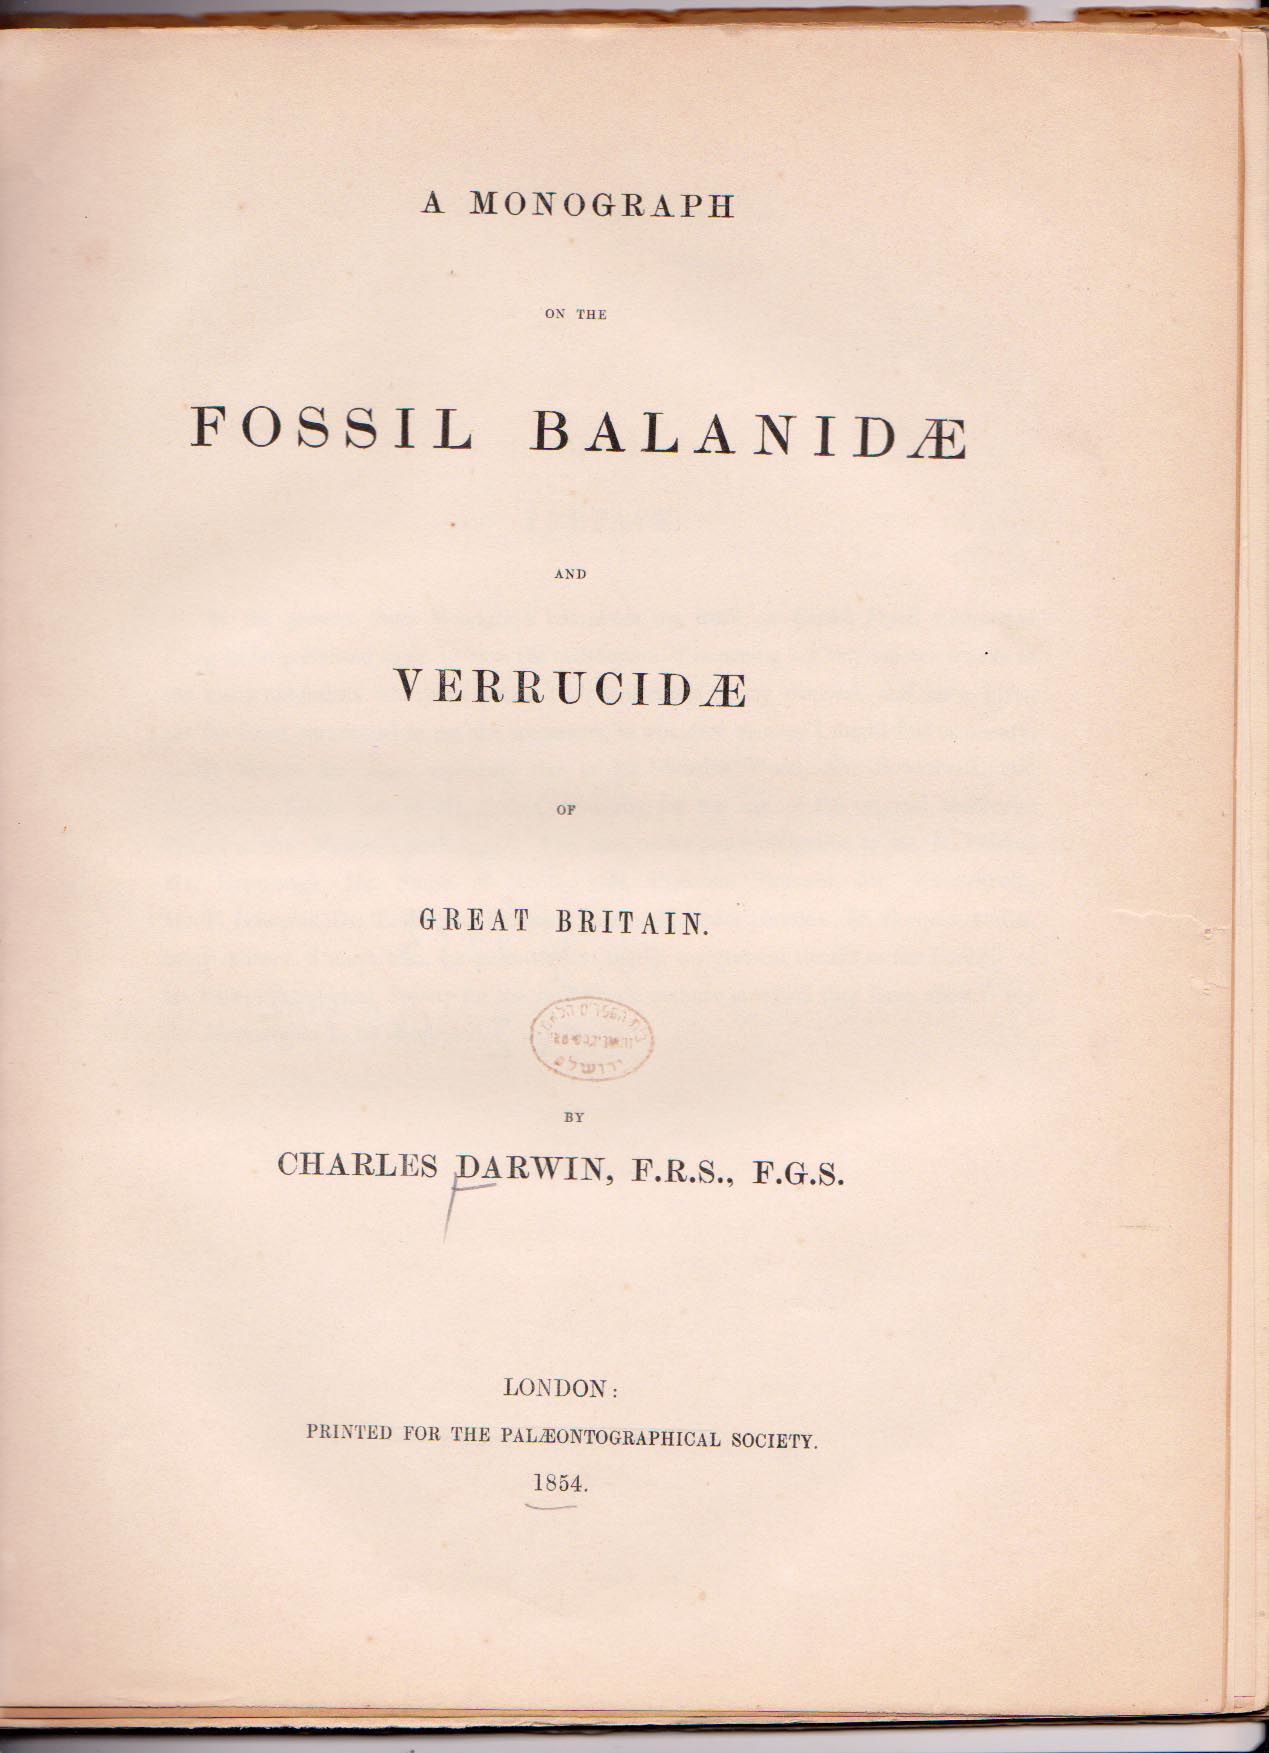 Darwin’s original 1st edition publication of the barnacles of Great Britain, 1854